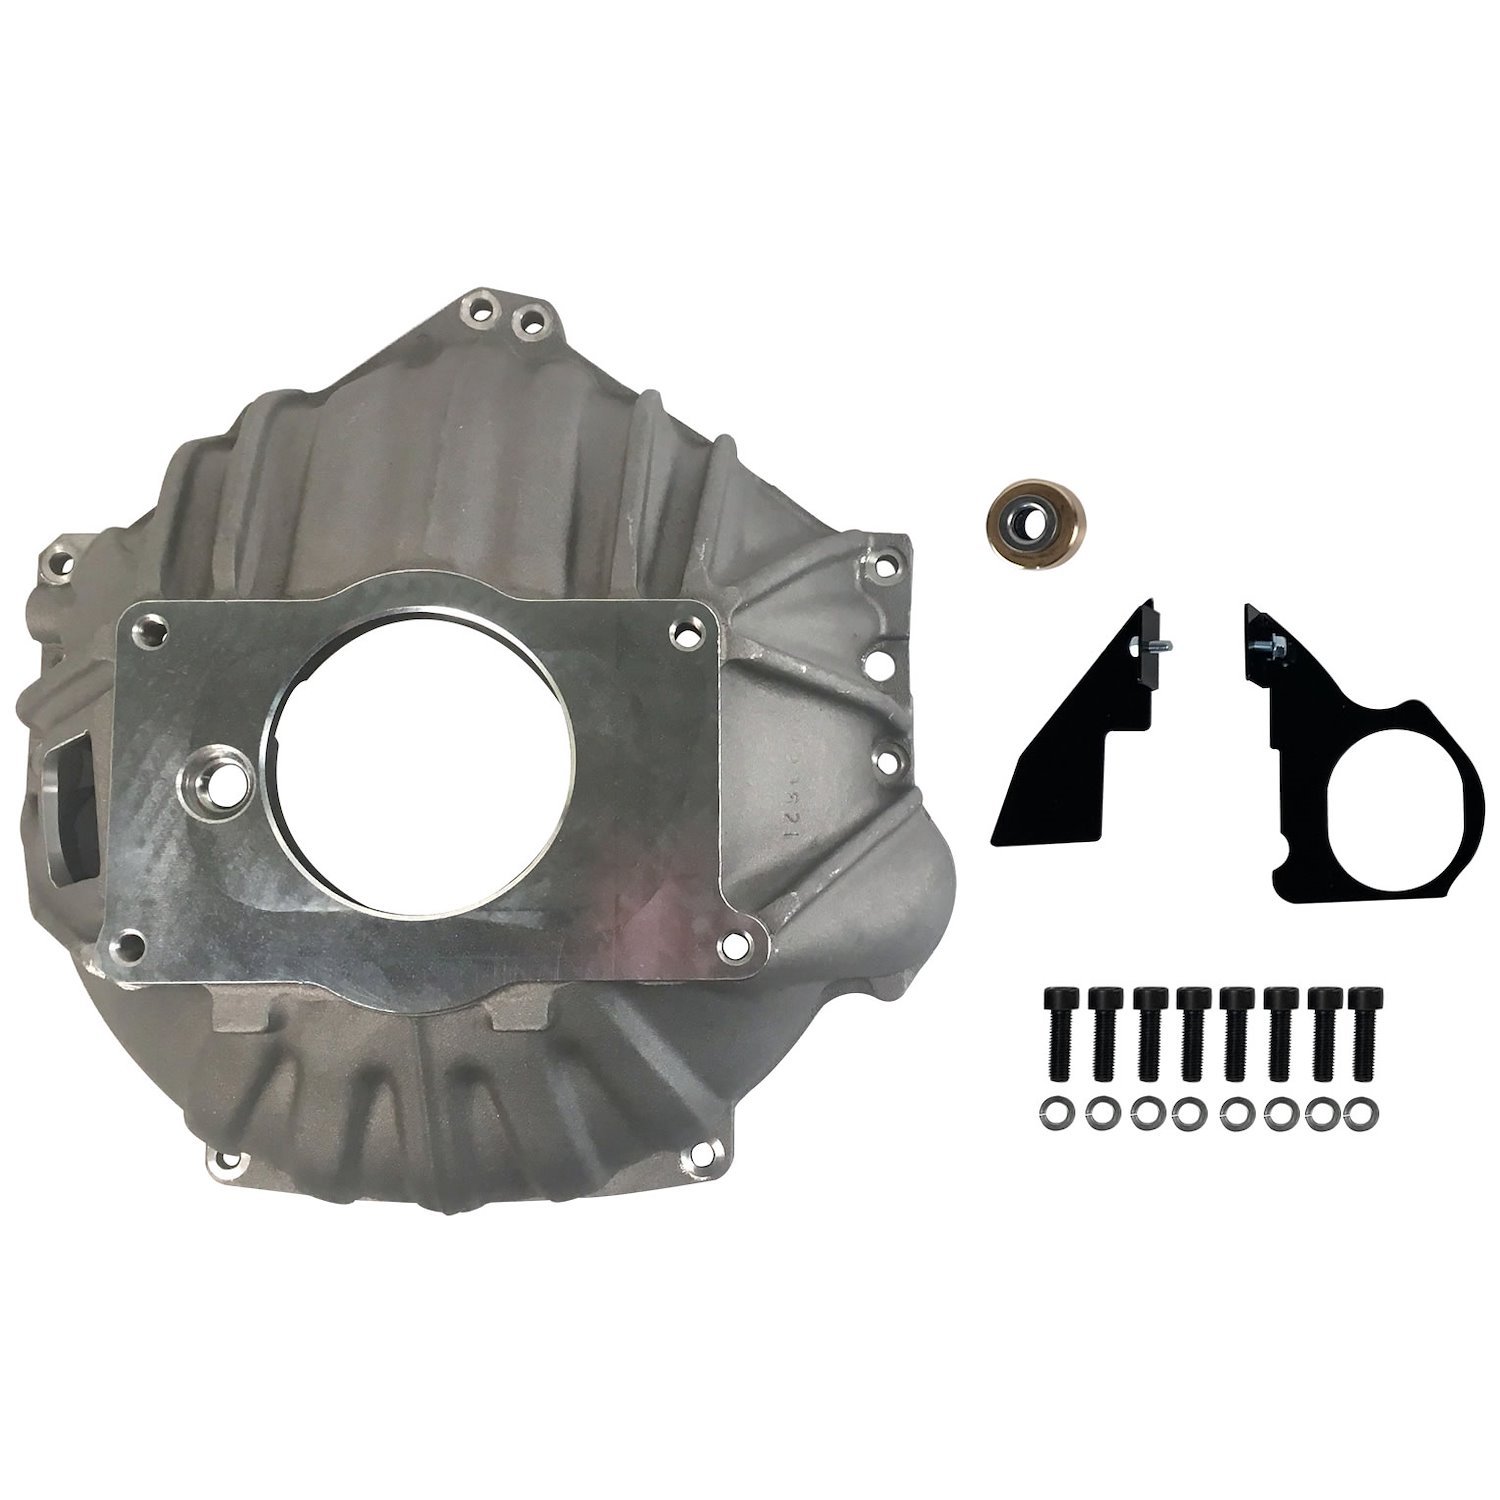 Bellhousing Chevy 621 Kit for LS LT Engines